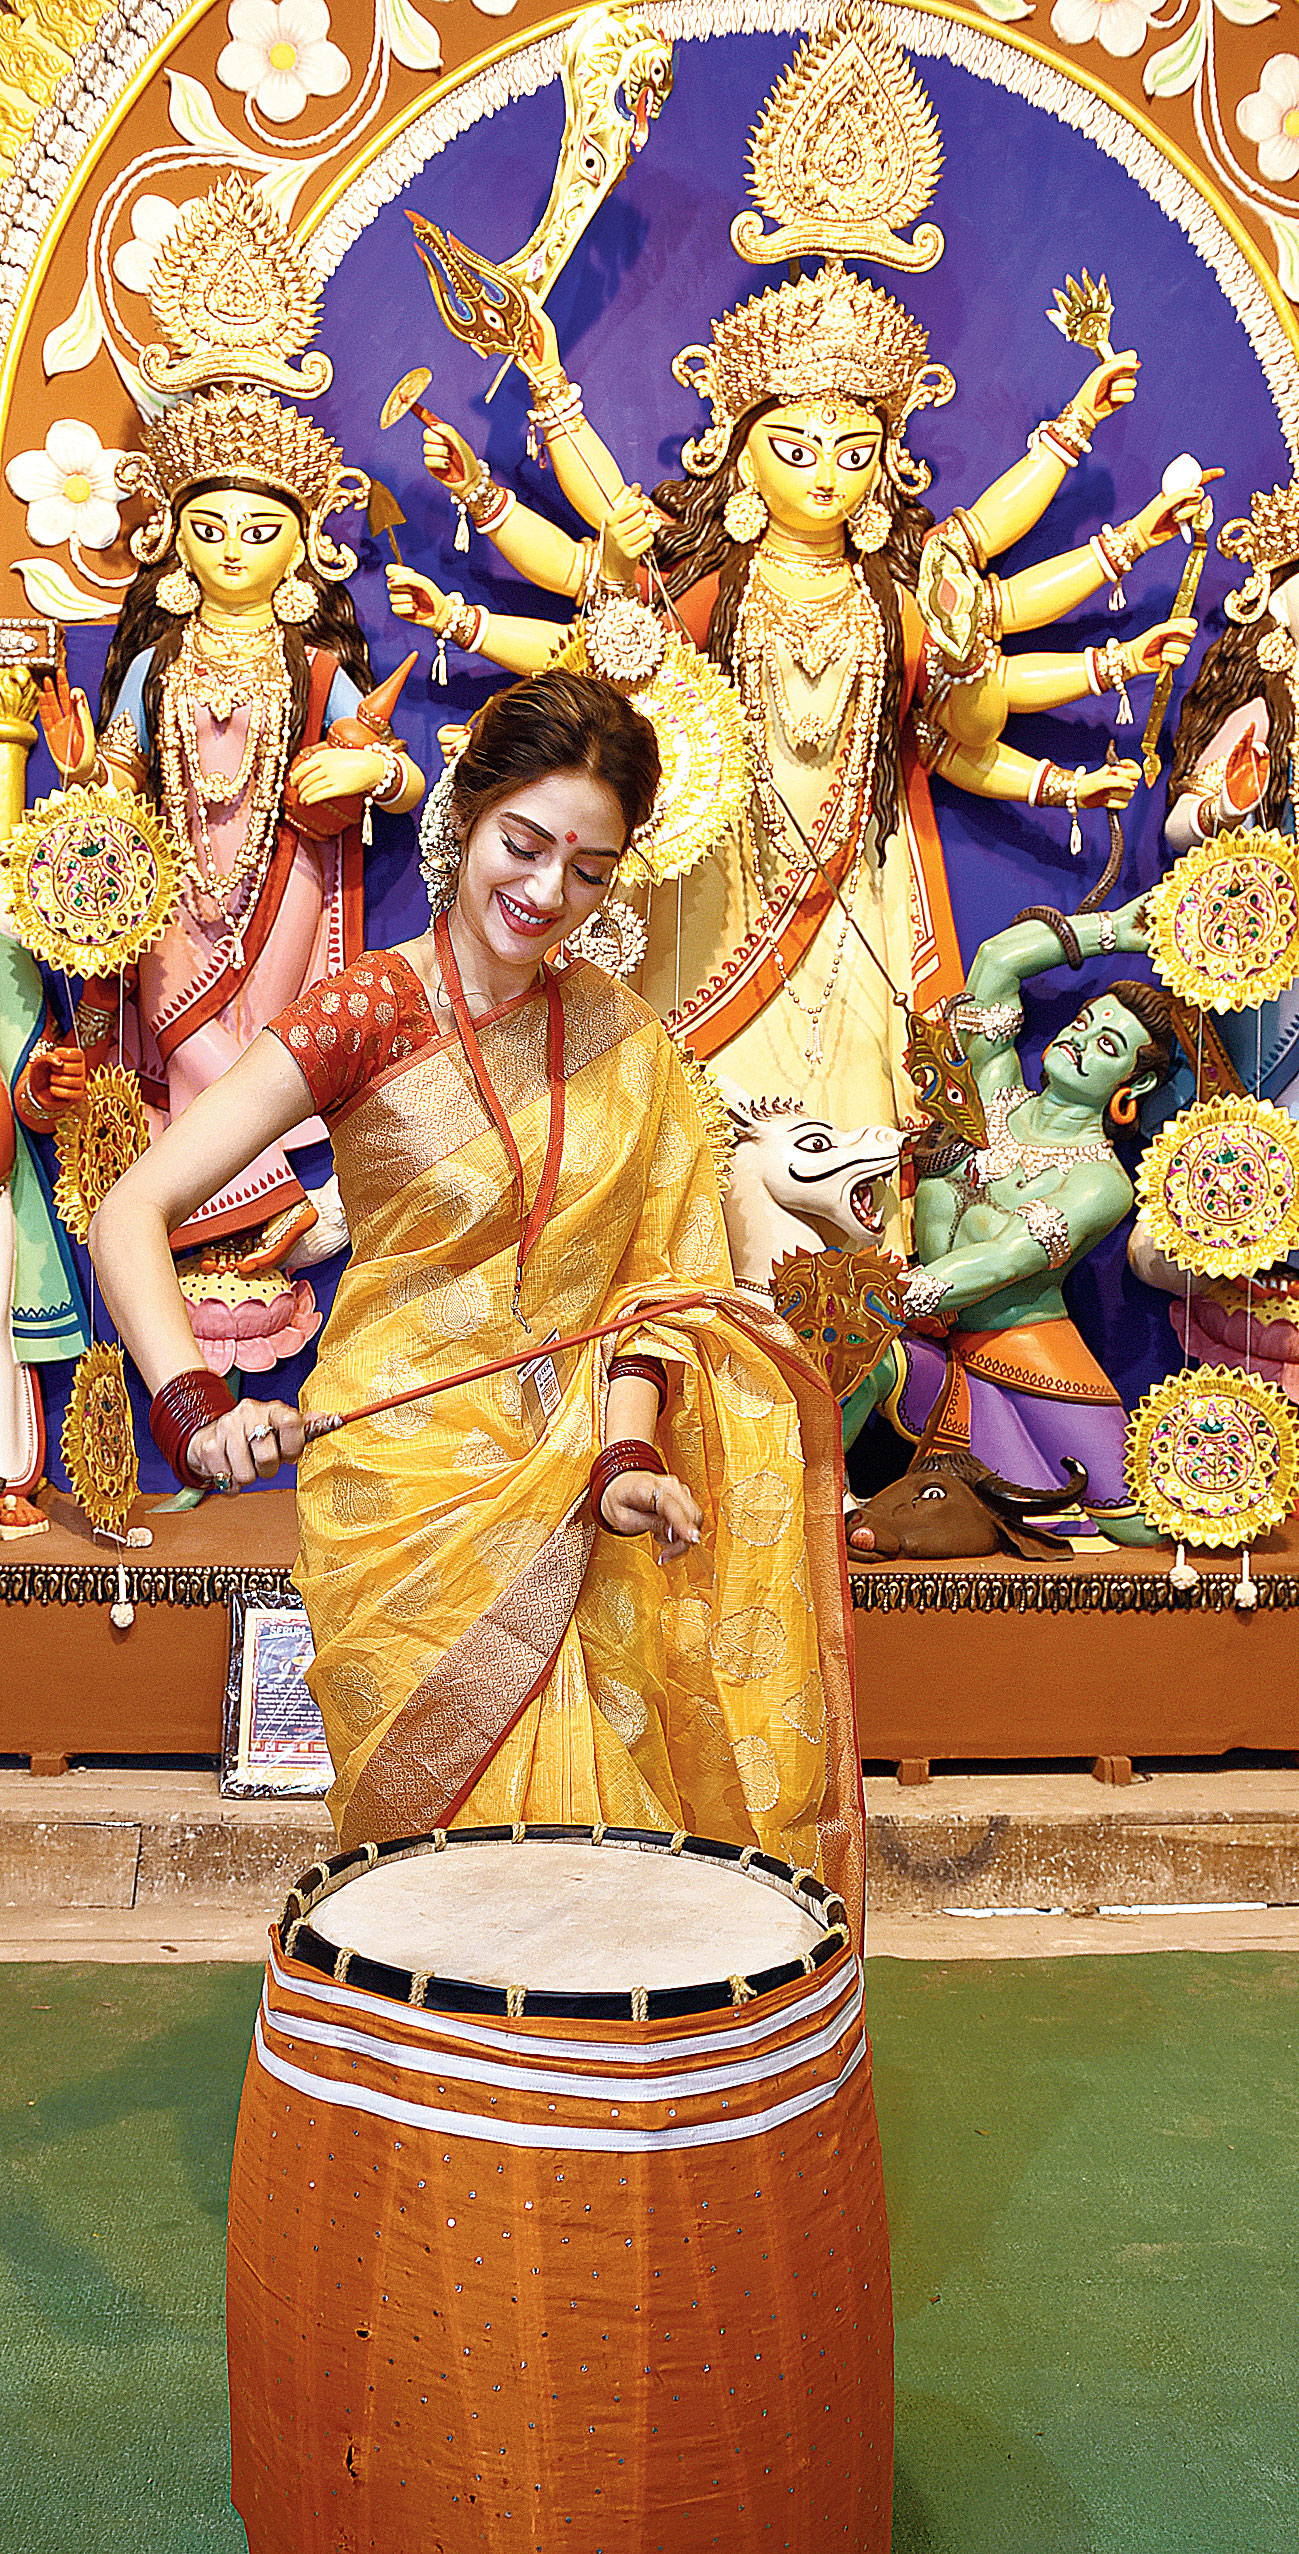 Nusrat Jahan tried her hand at playing a dhaak for the first time at the Olabibitola Sarbojanin puja in Howrah. “I have only played the guitar so far. Sync-e chhilo… besh moja legechhe… it was great fun. You should wake up to the beats of dhaak during Puja. That’s the blessed part about being a Calcuttan. We wait for it the whole year. It took me back to my childhood when I would actually wake up to the beats of dhaak,” she smiled